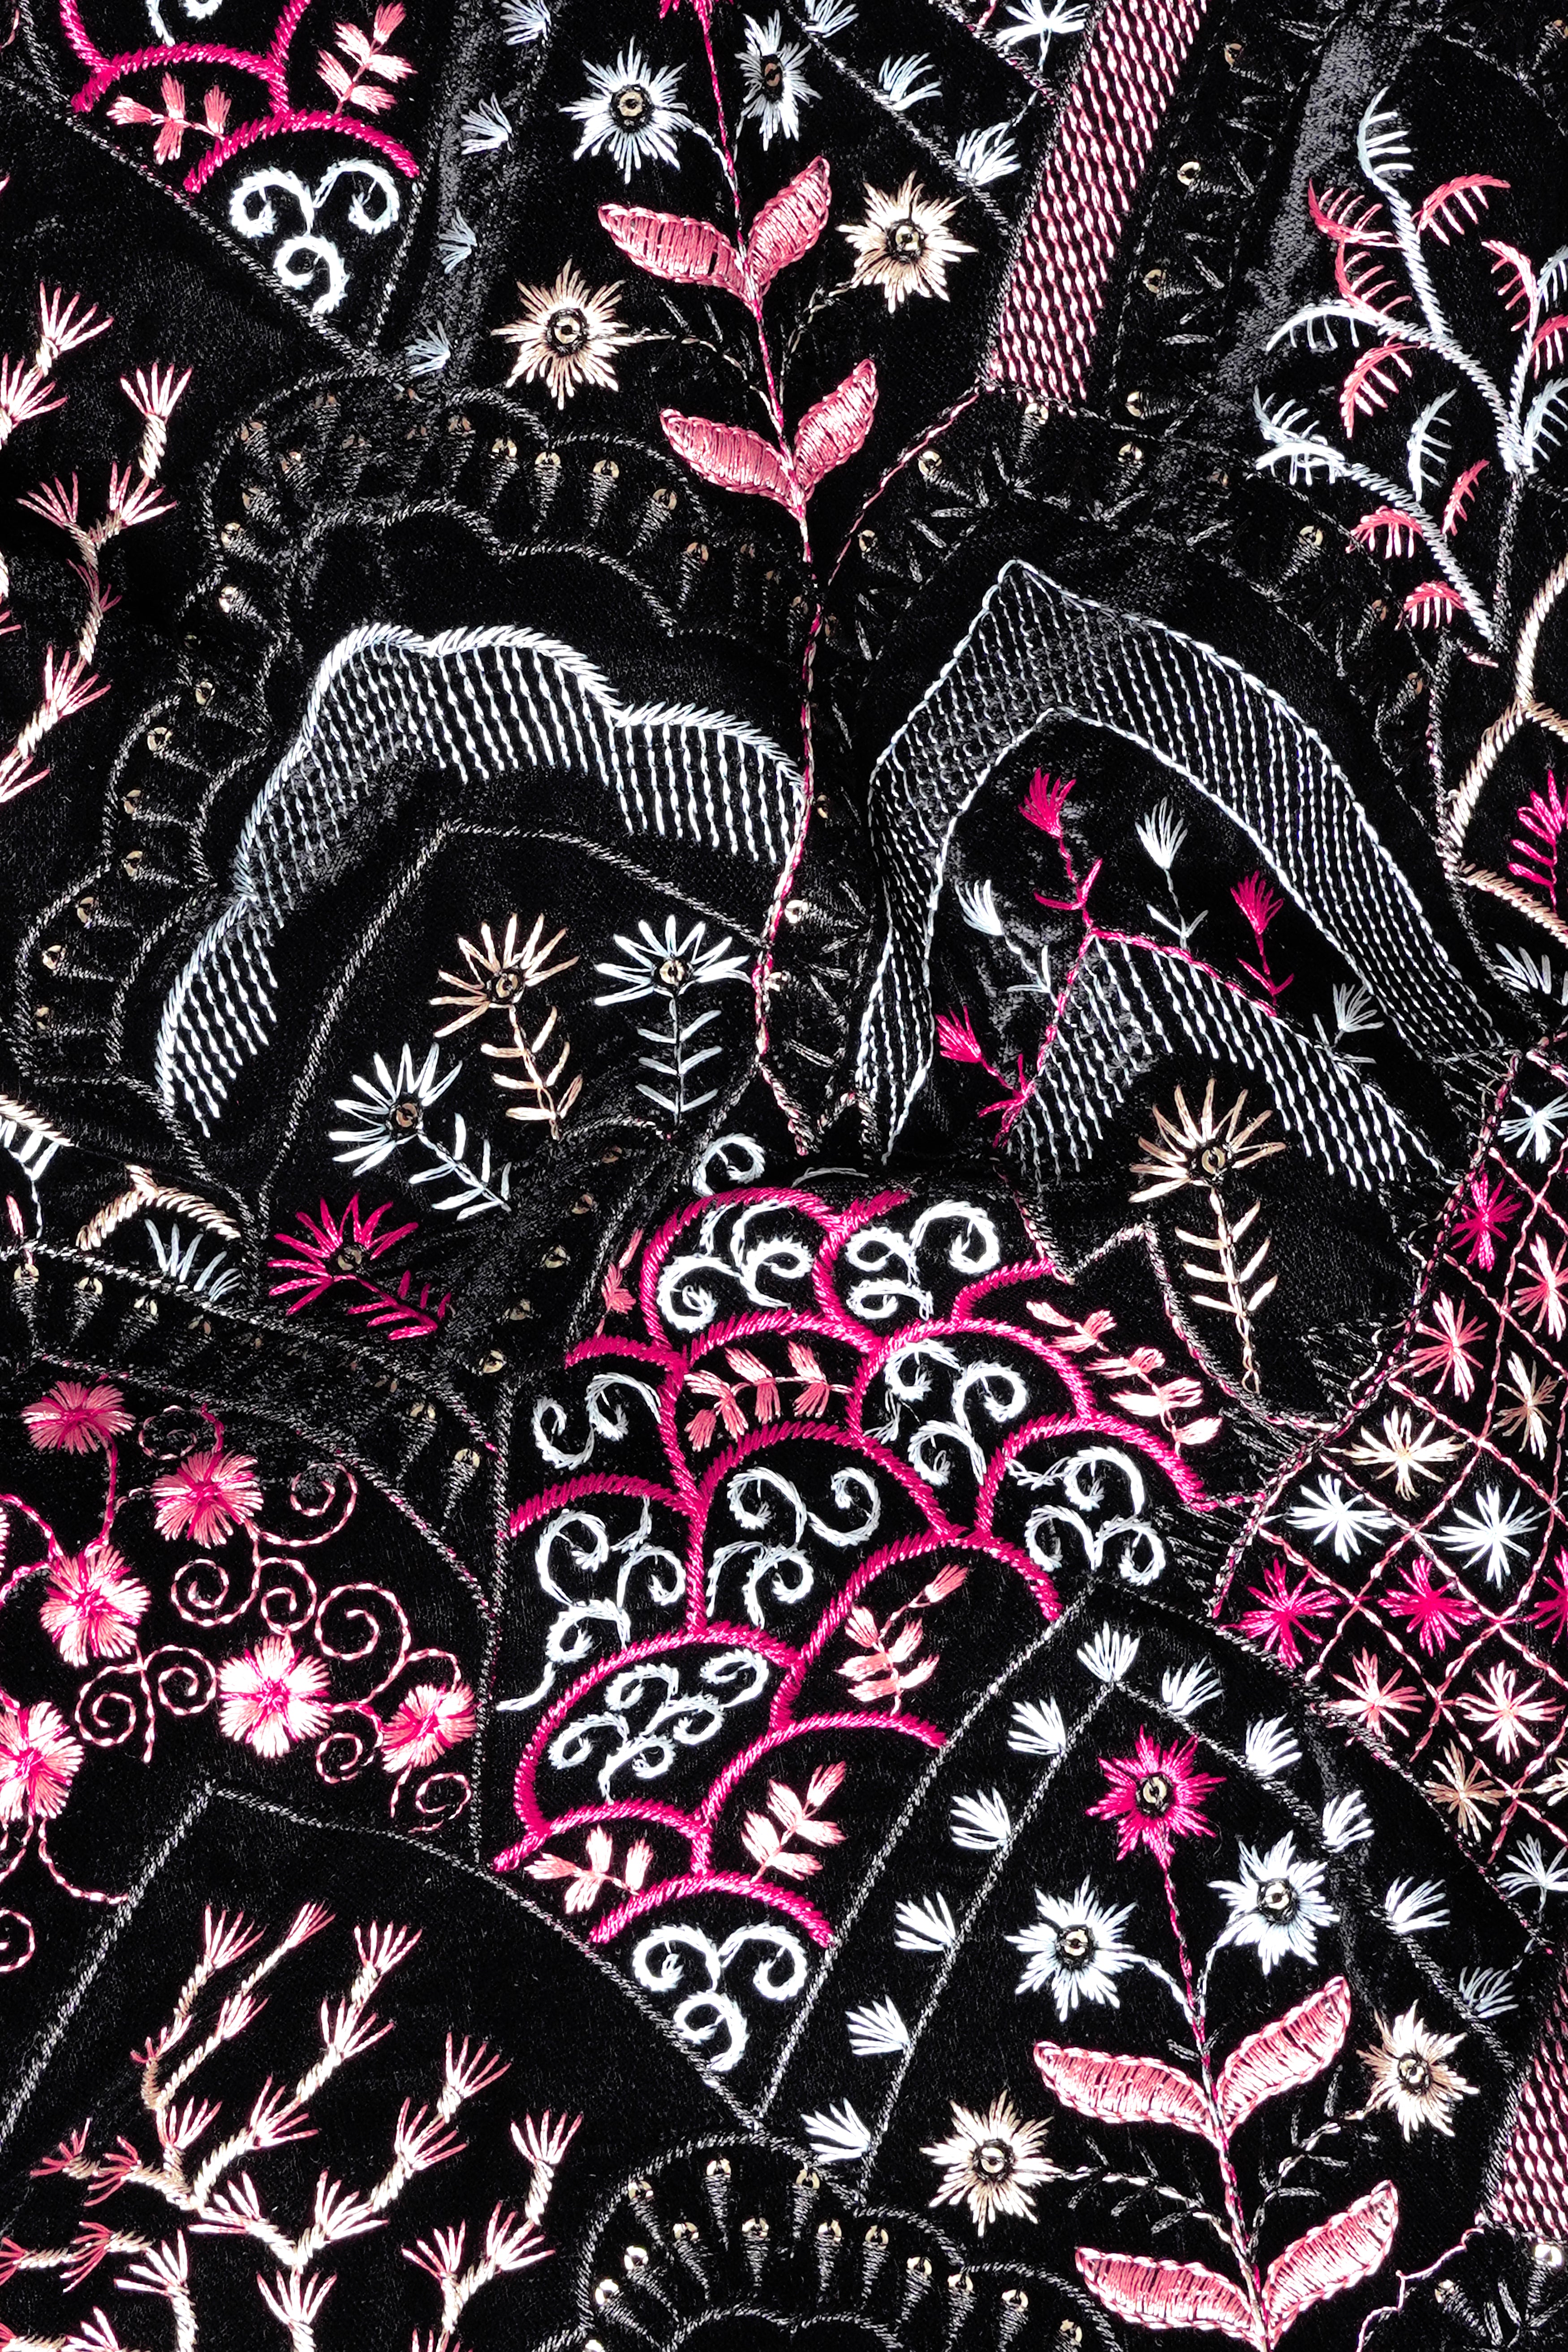 Jade Black with Tyrian Pink and Opium Brown Multicolour Floral Embroidered Cross Buttoned Bandhgala Jodhpuri BL3488-CBG-36, BL3488-CBG-38, BL3488-CBG-40, BL3488-CBG-42, BL3488-CBG-44, BL3488-CBG-46, BL3488-CBG-48, BL3488-CBG-50, BL3488-CBG-52, BL3488-CBG-54, BL3488-CBG-56, BL3488-CBG-58, BL3488-CBG-60